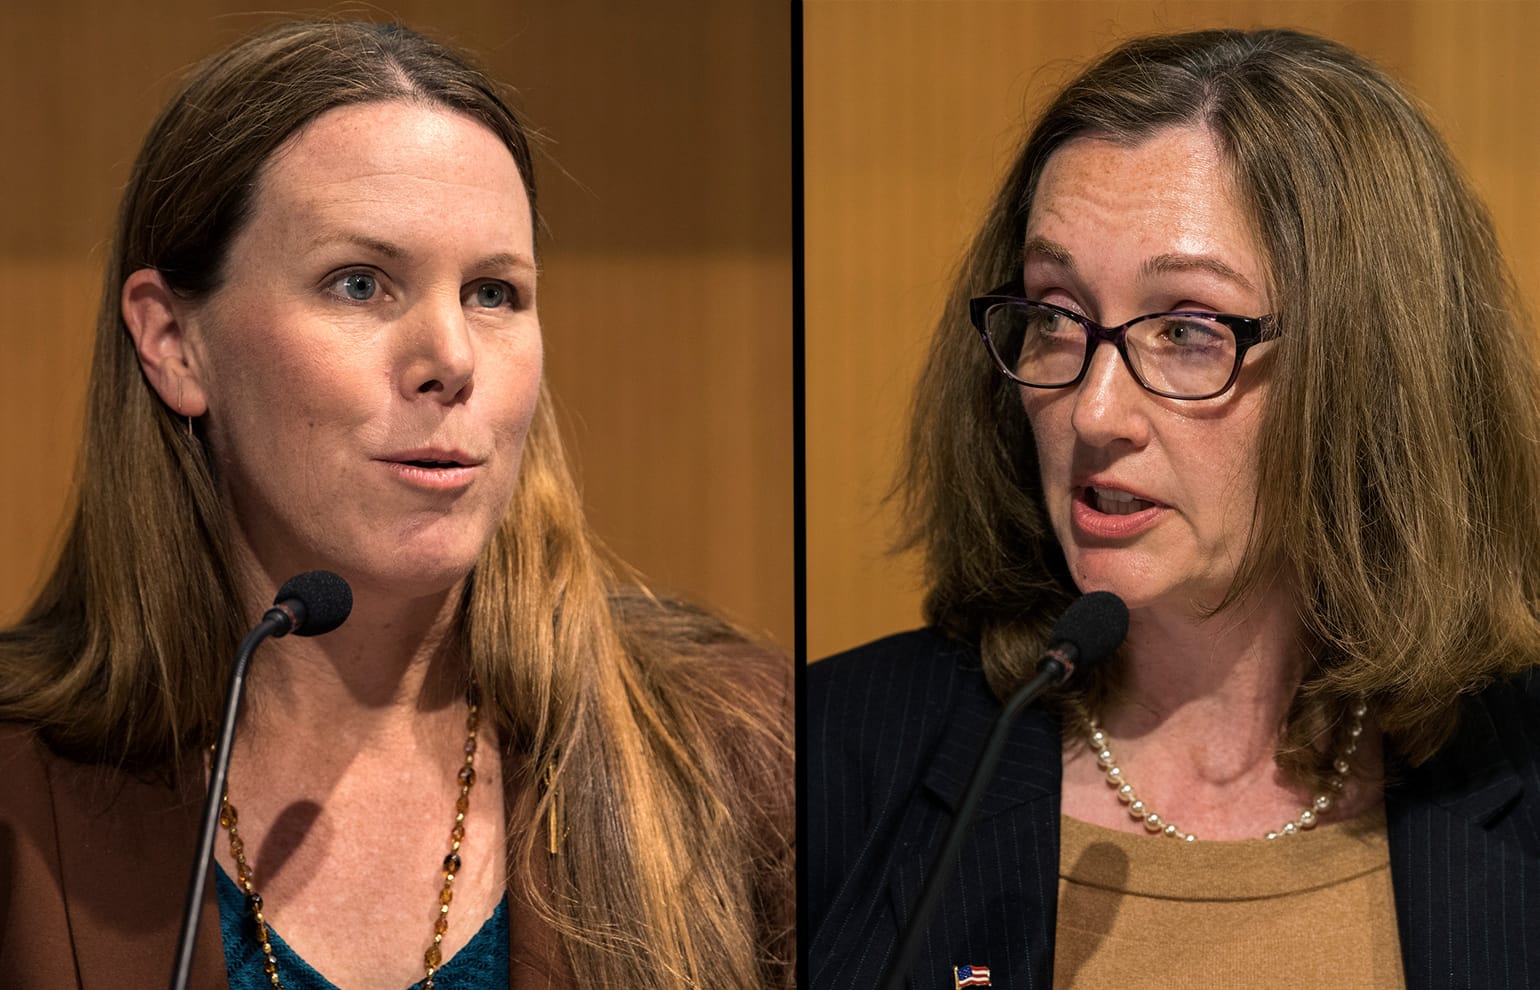 Vancouver City Council, position 1 candidates Sarah Fox  and Laurie Lebowsky will advance to the general election in November.